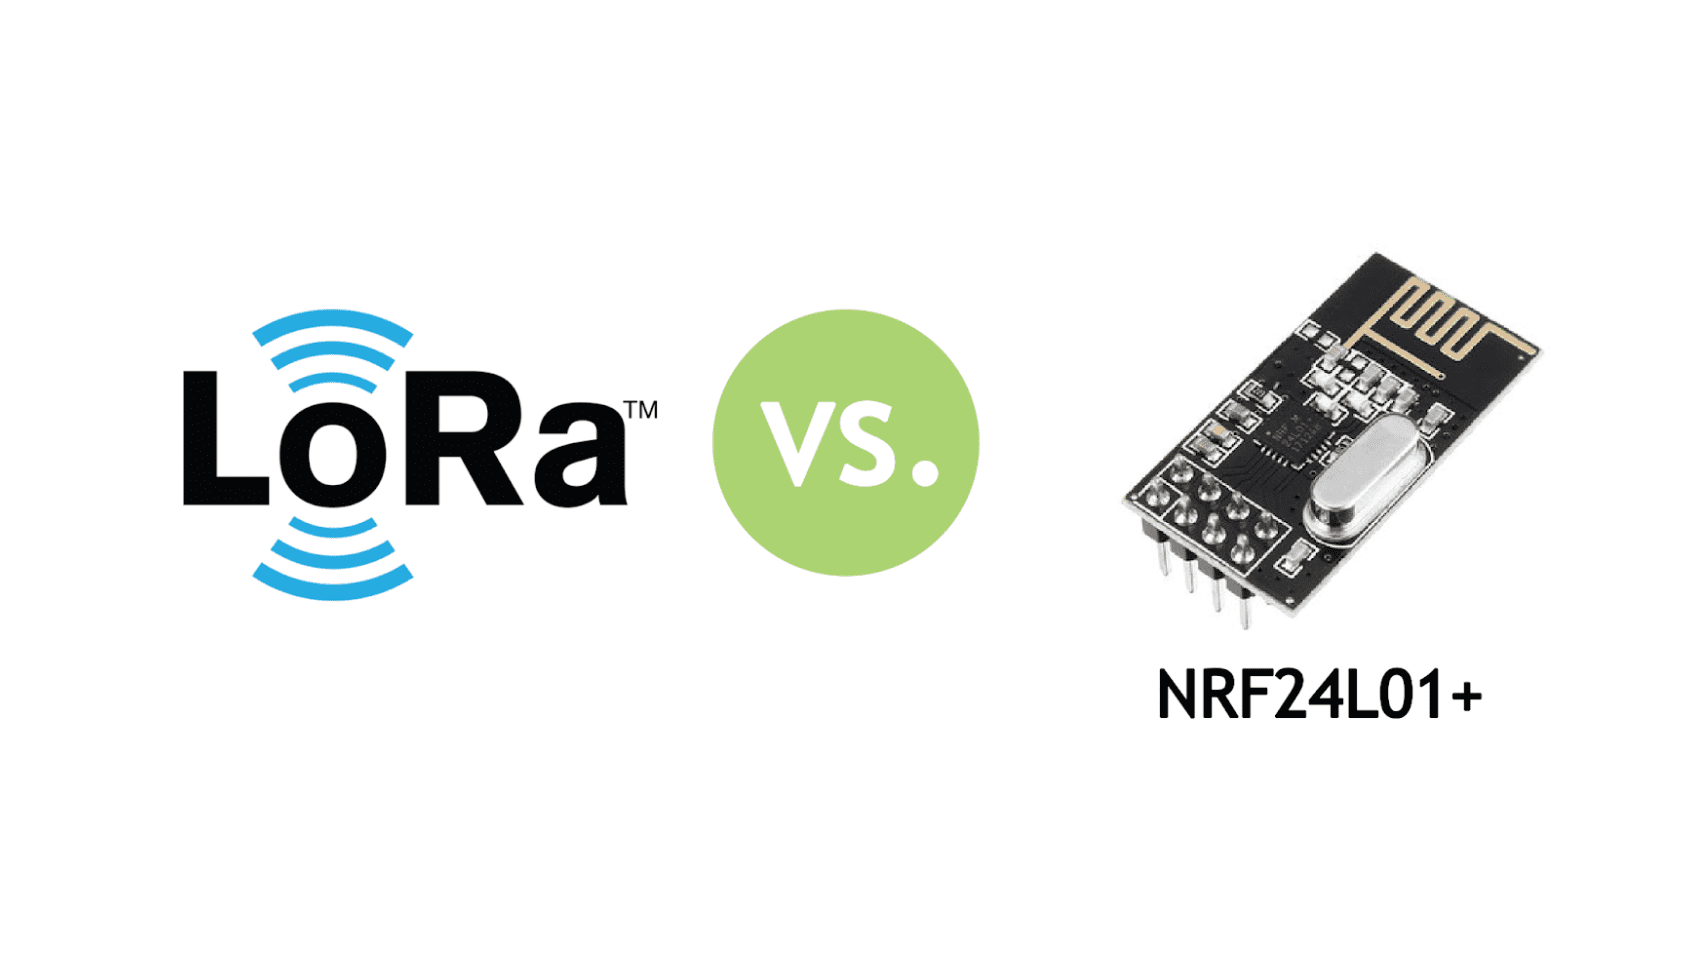 Use an nRF24L01 Module to Scan the 2.4GHz Frequency Range